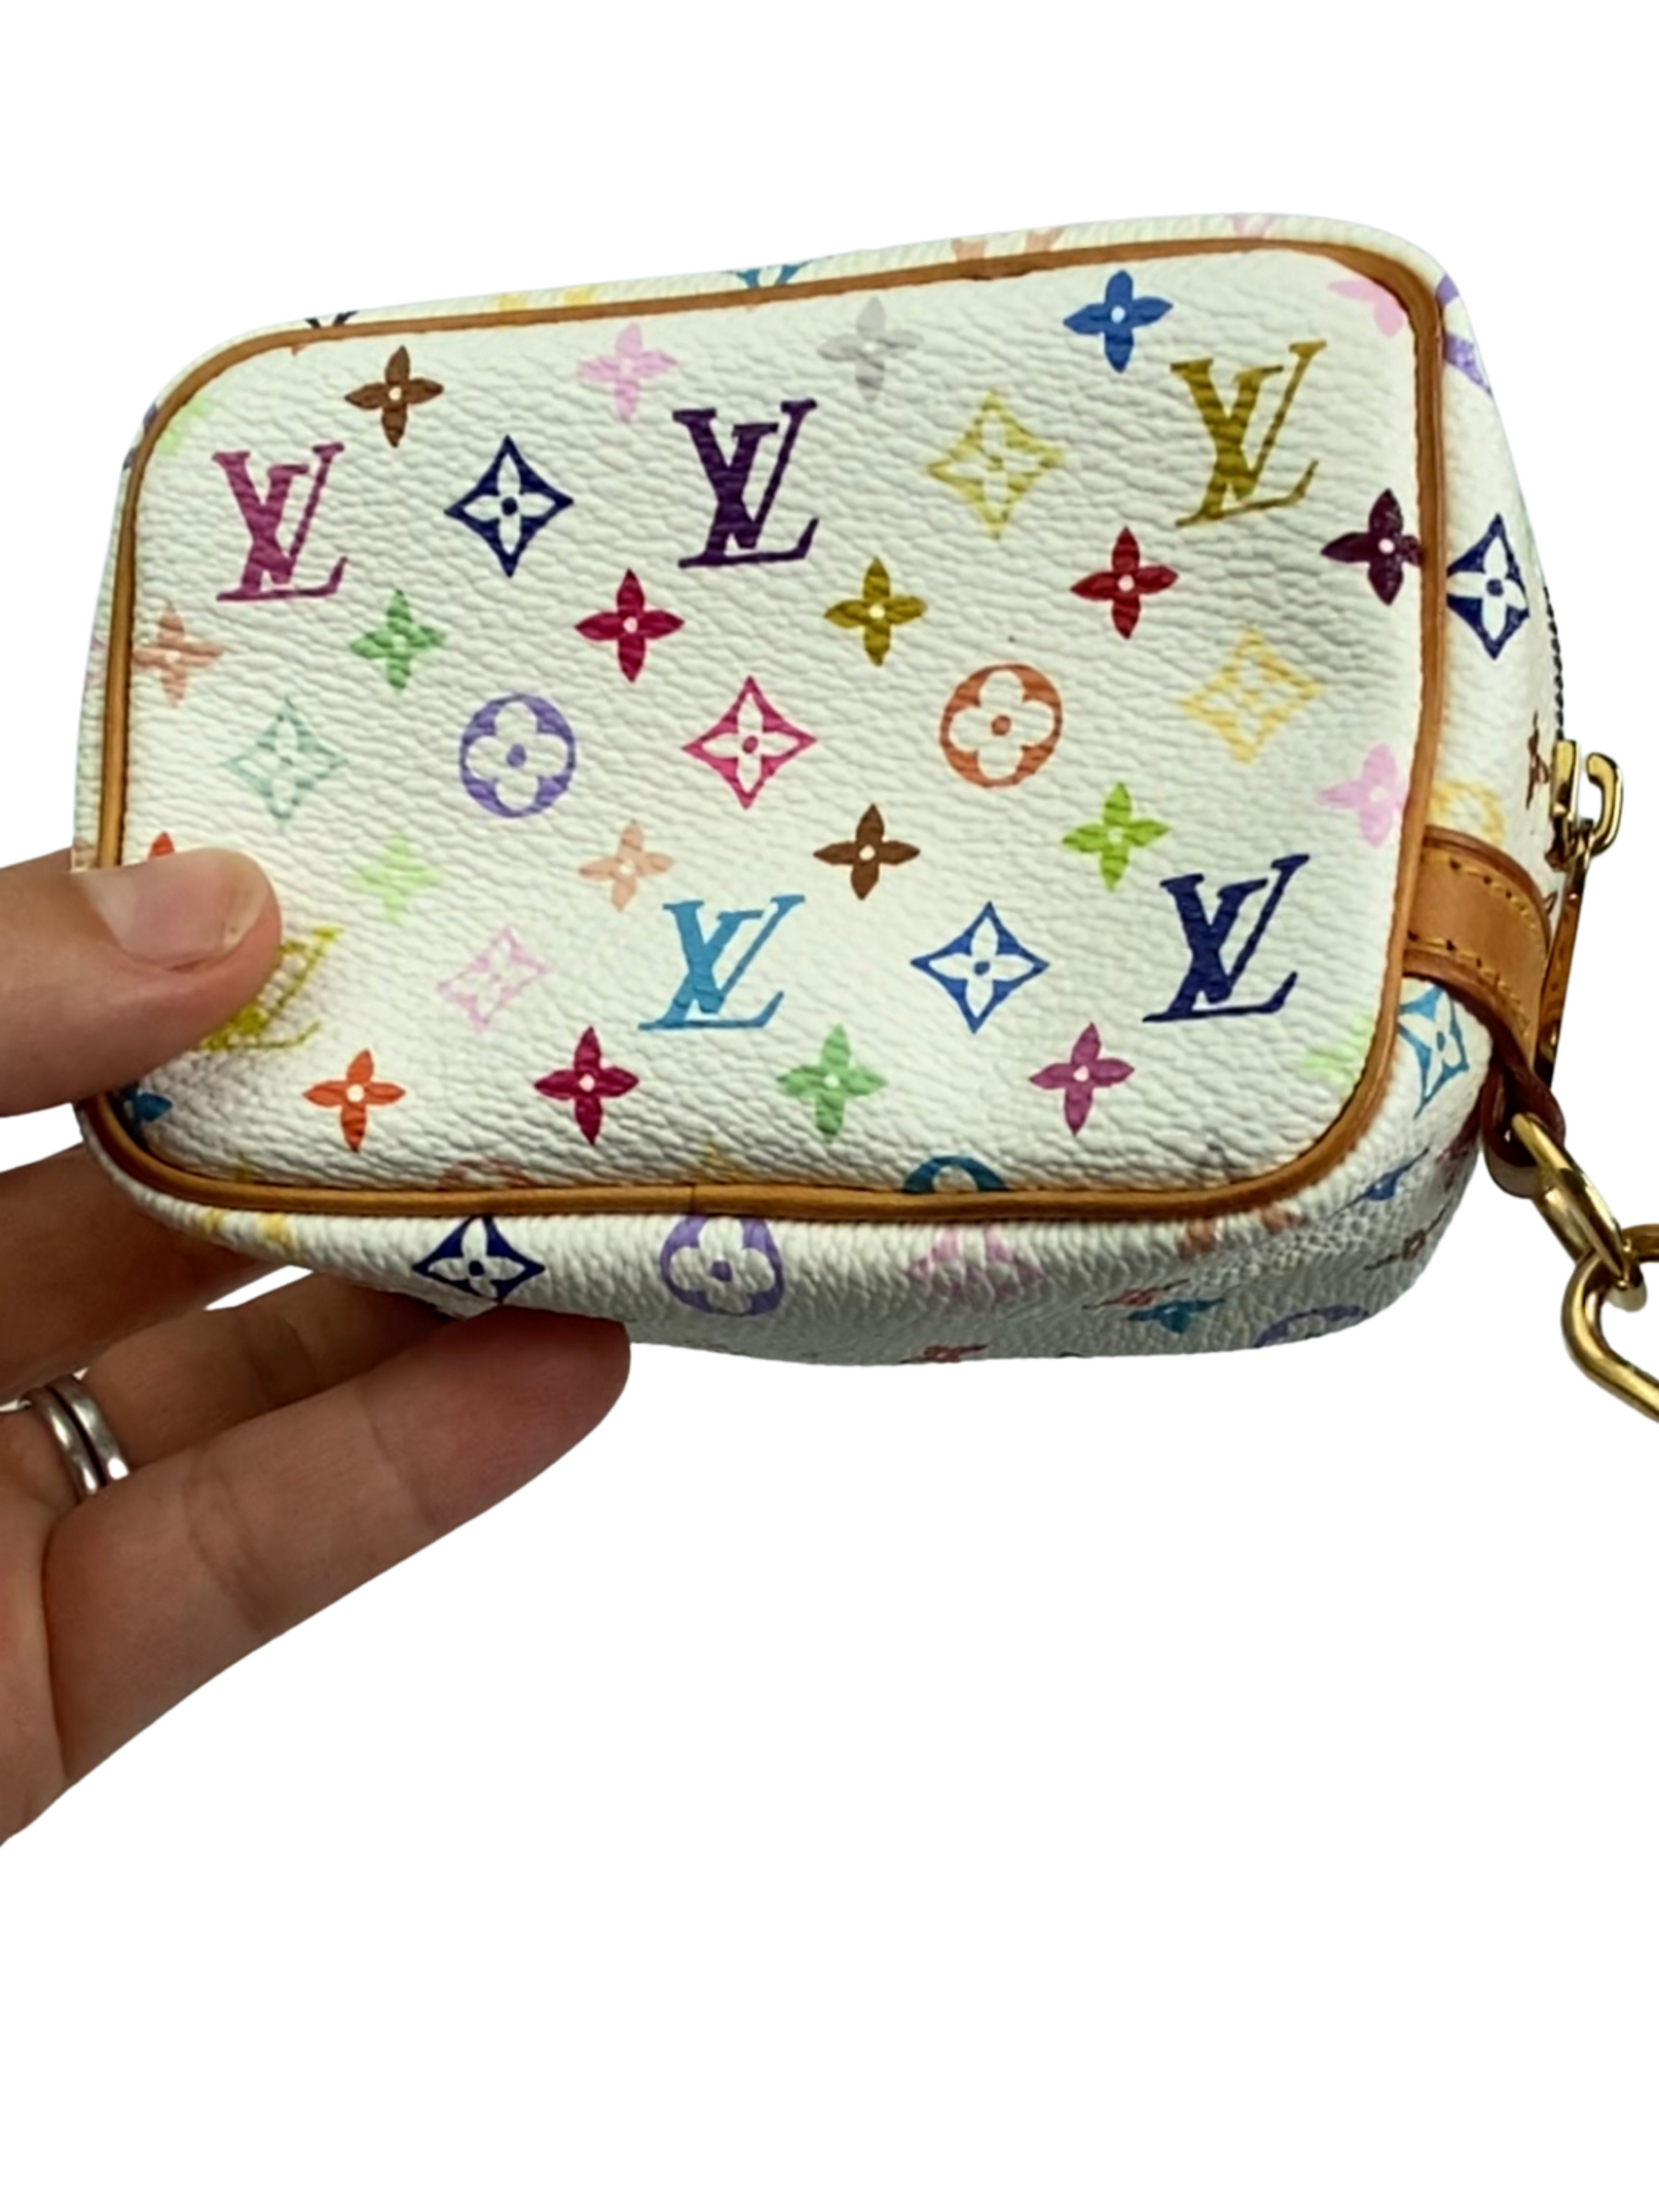 2005 pre-owned Wapity coin pouch